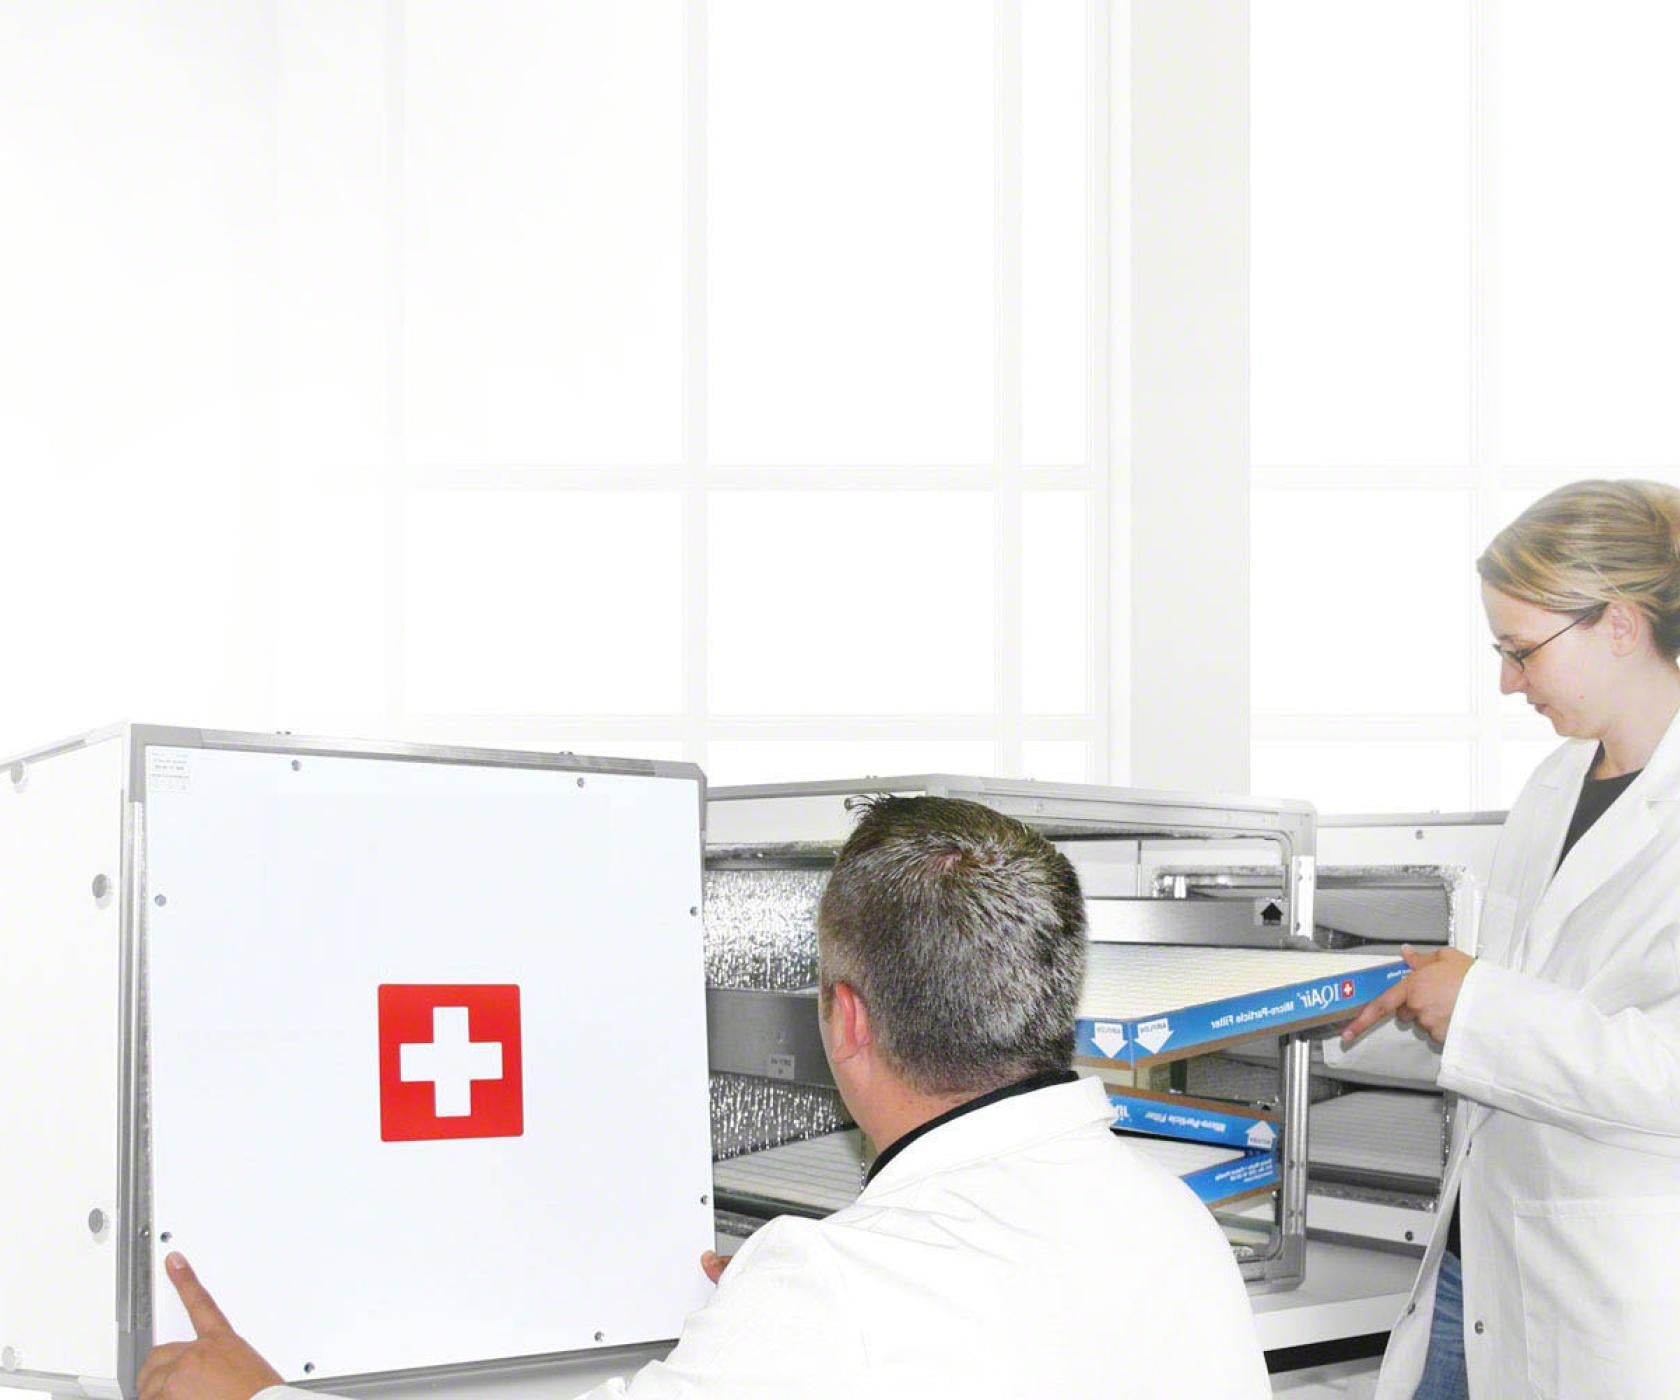 PerfectPro being inspected by lab workers